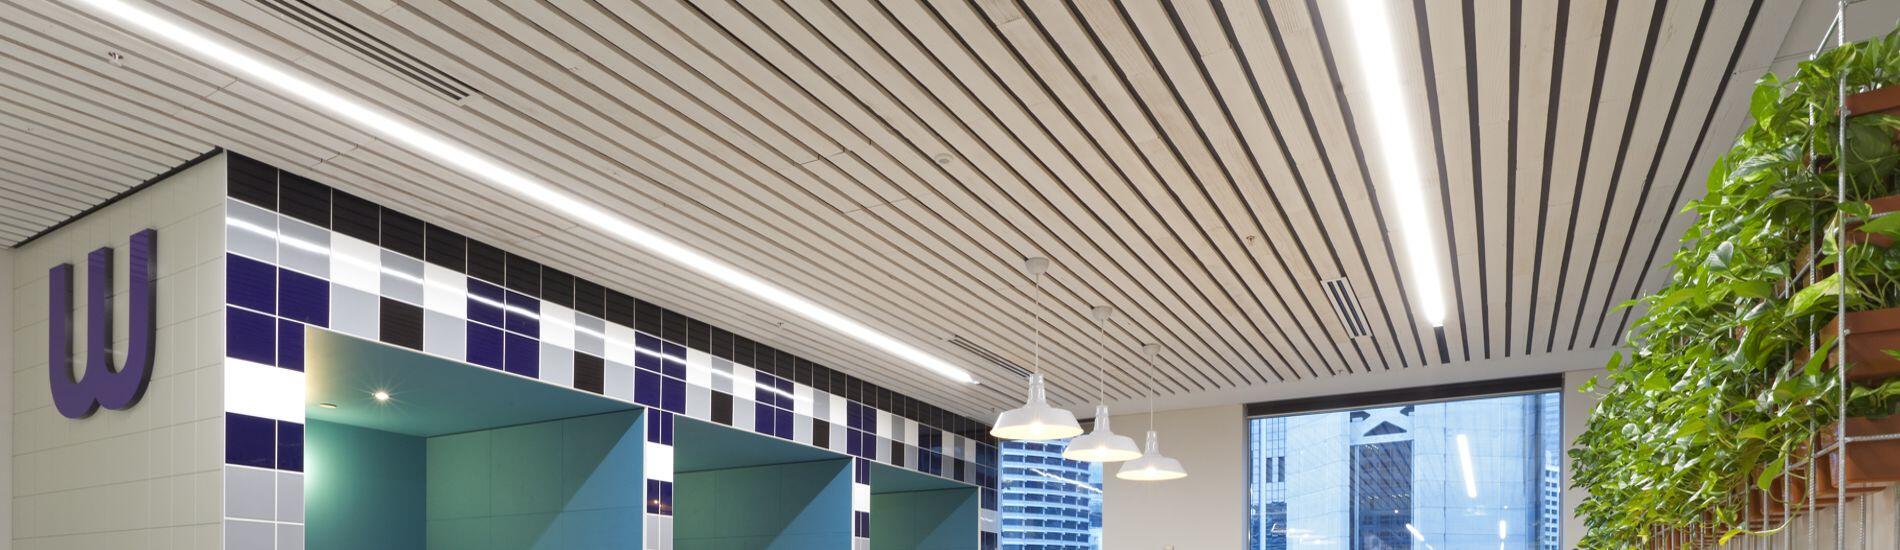 DRIFTWOOD Rustic Timber Slat Ceiling Throught Activity-Based Workplace Fitout